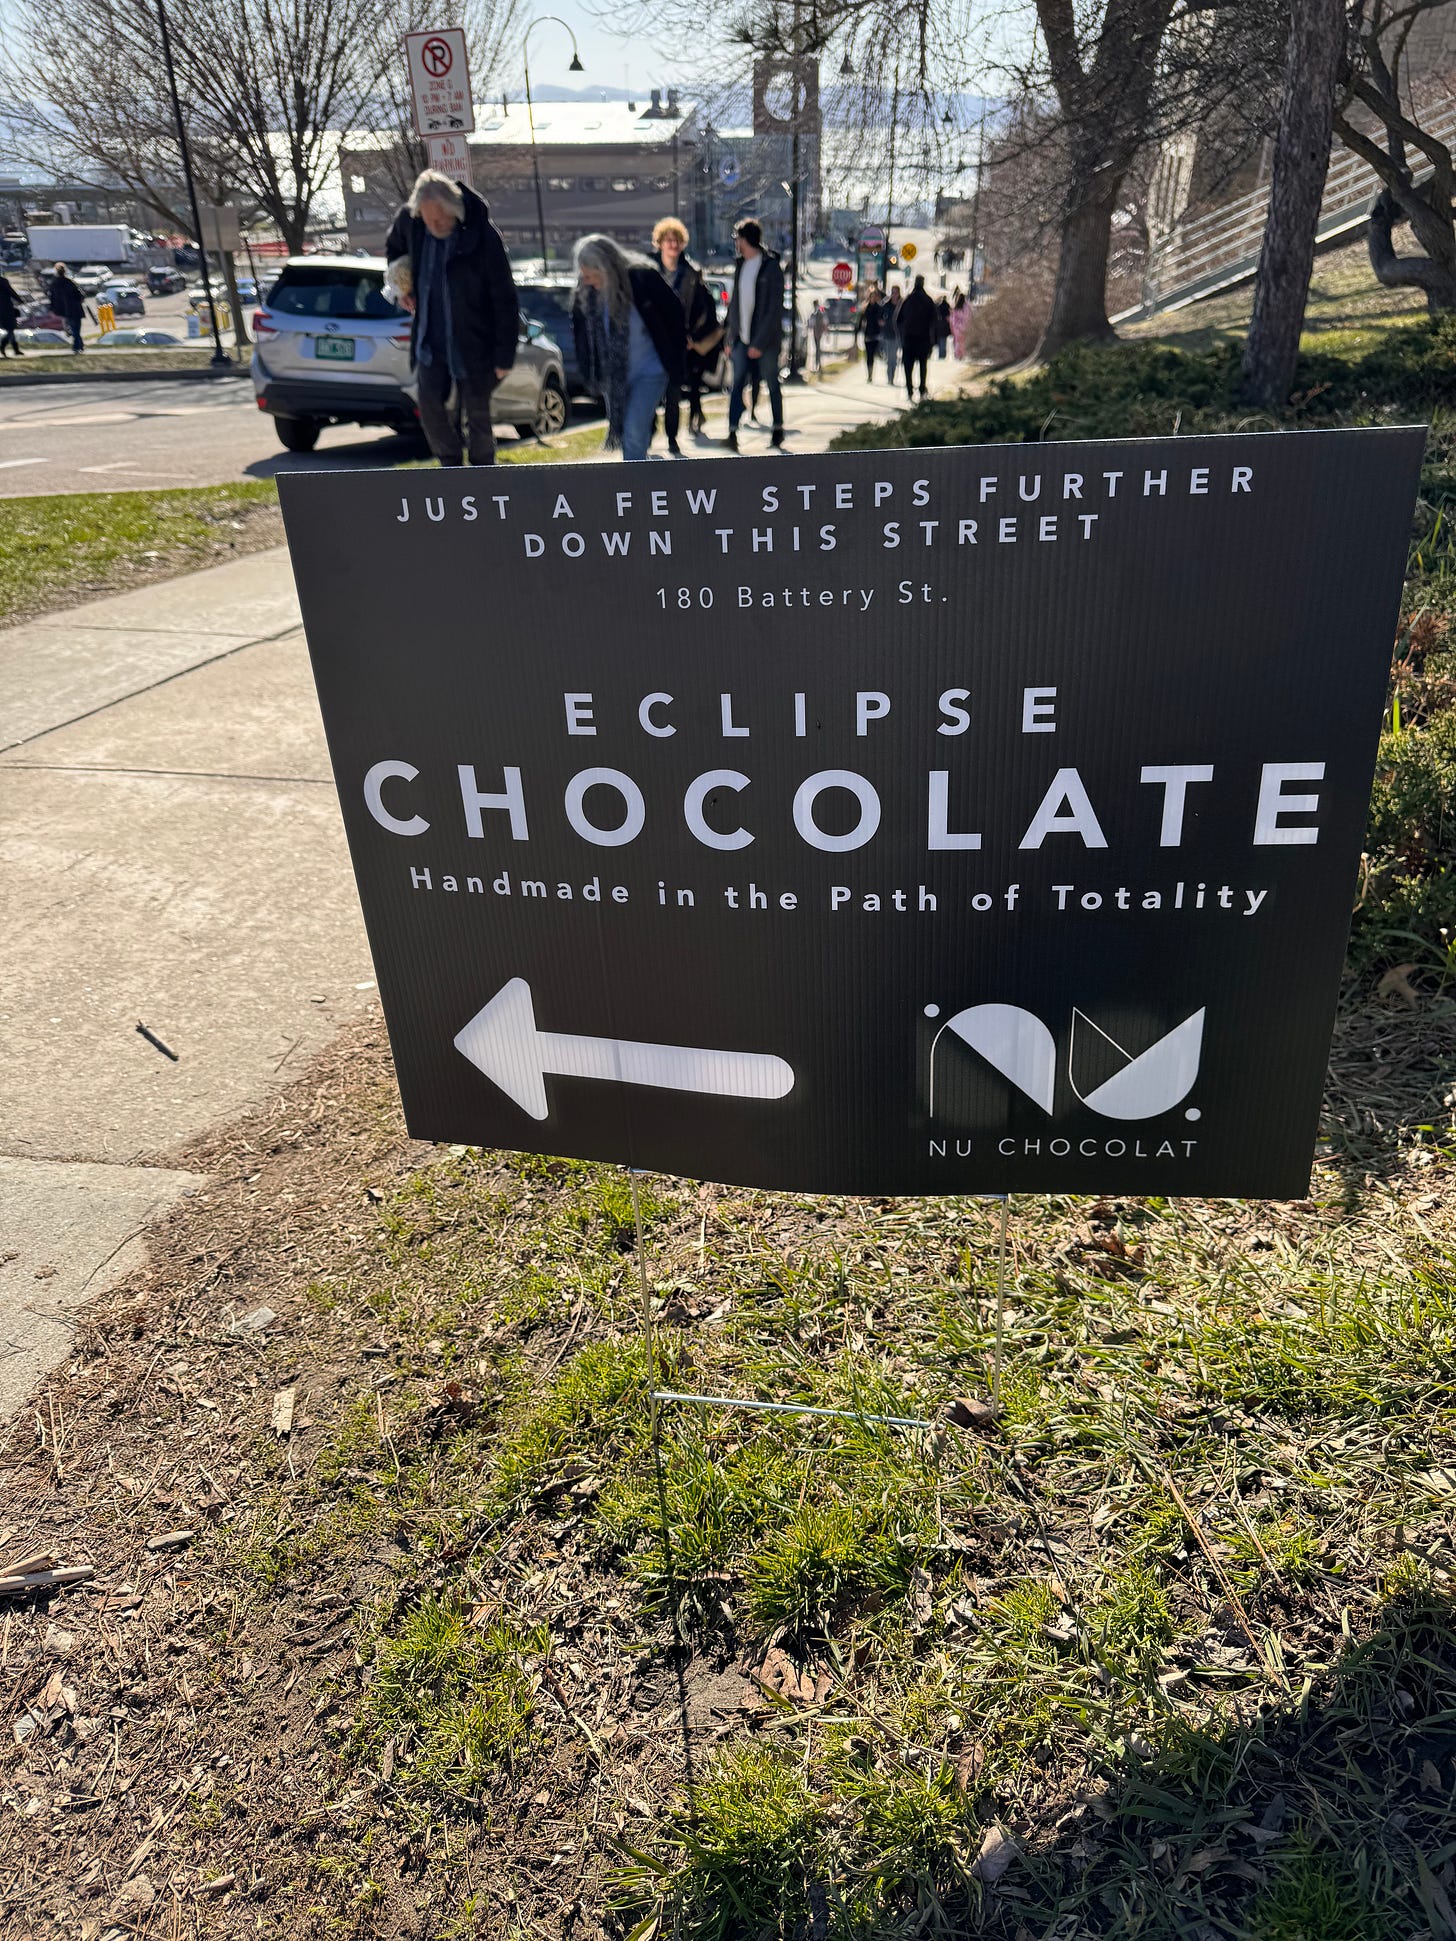 Cardboard sign propped up beside a sidewalk, reading: "Eclipse Chocolate: Handmade in the Path of Totality" (this way)